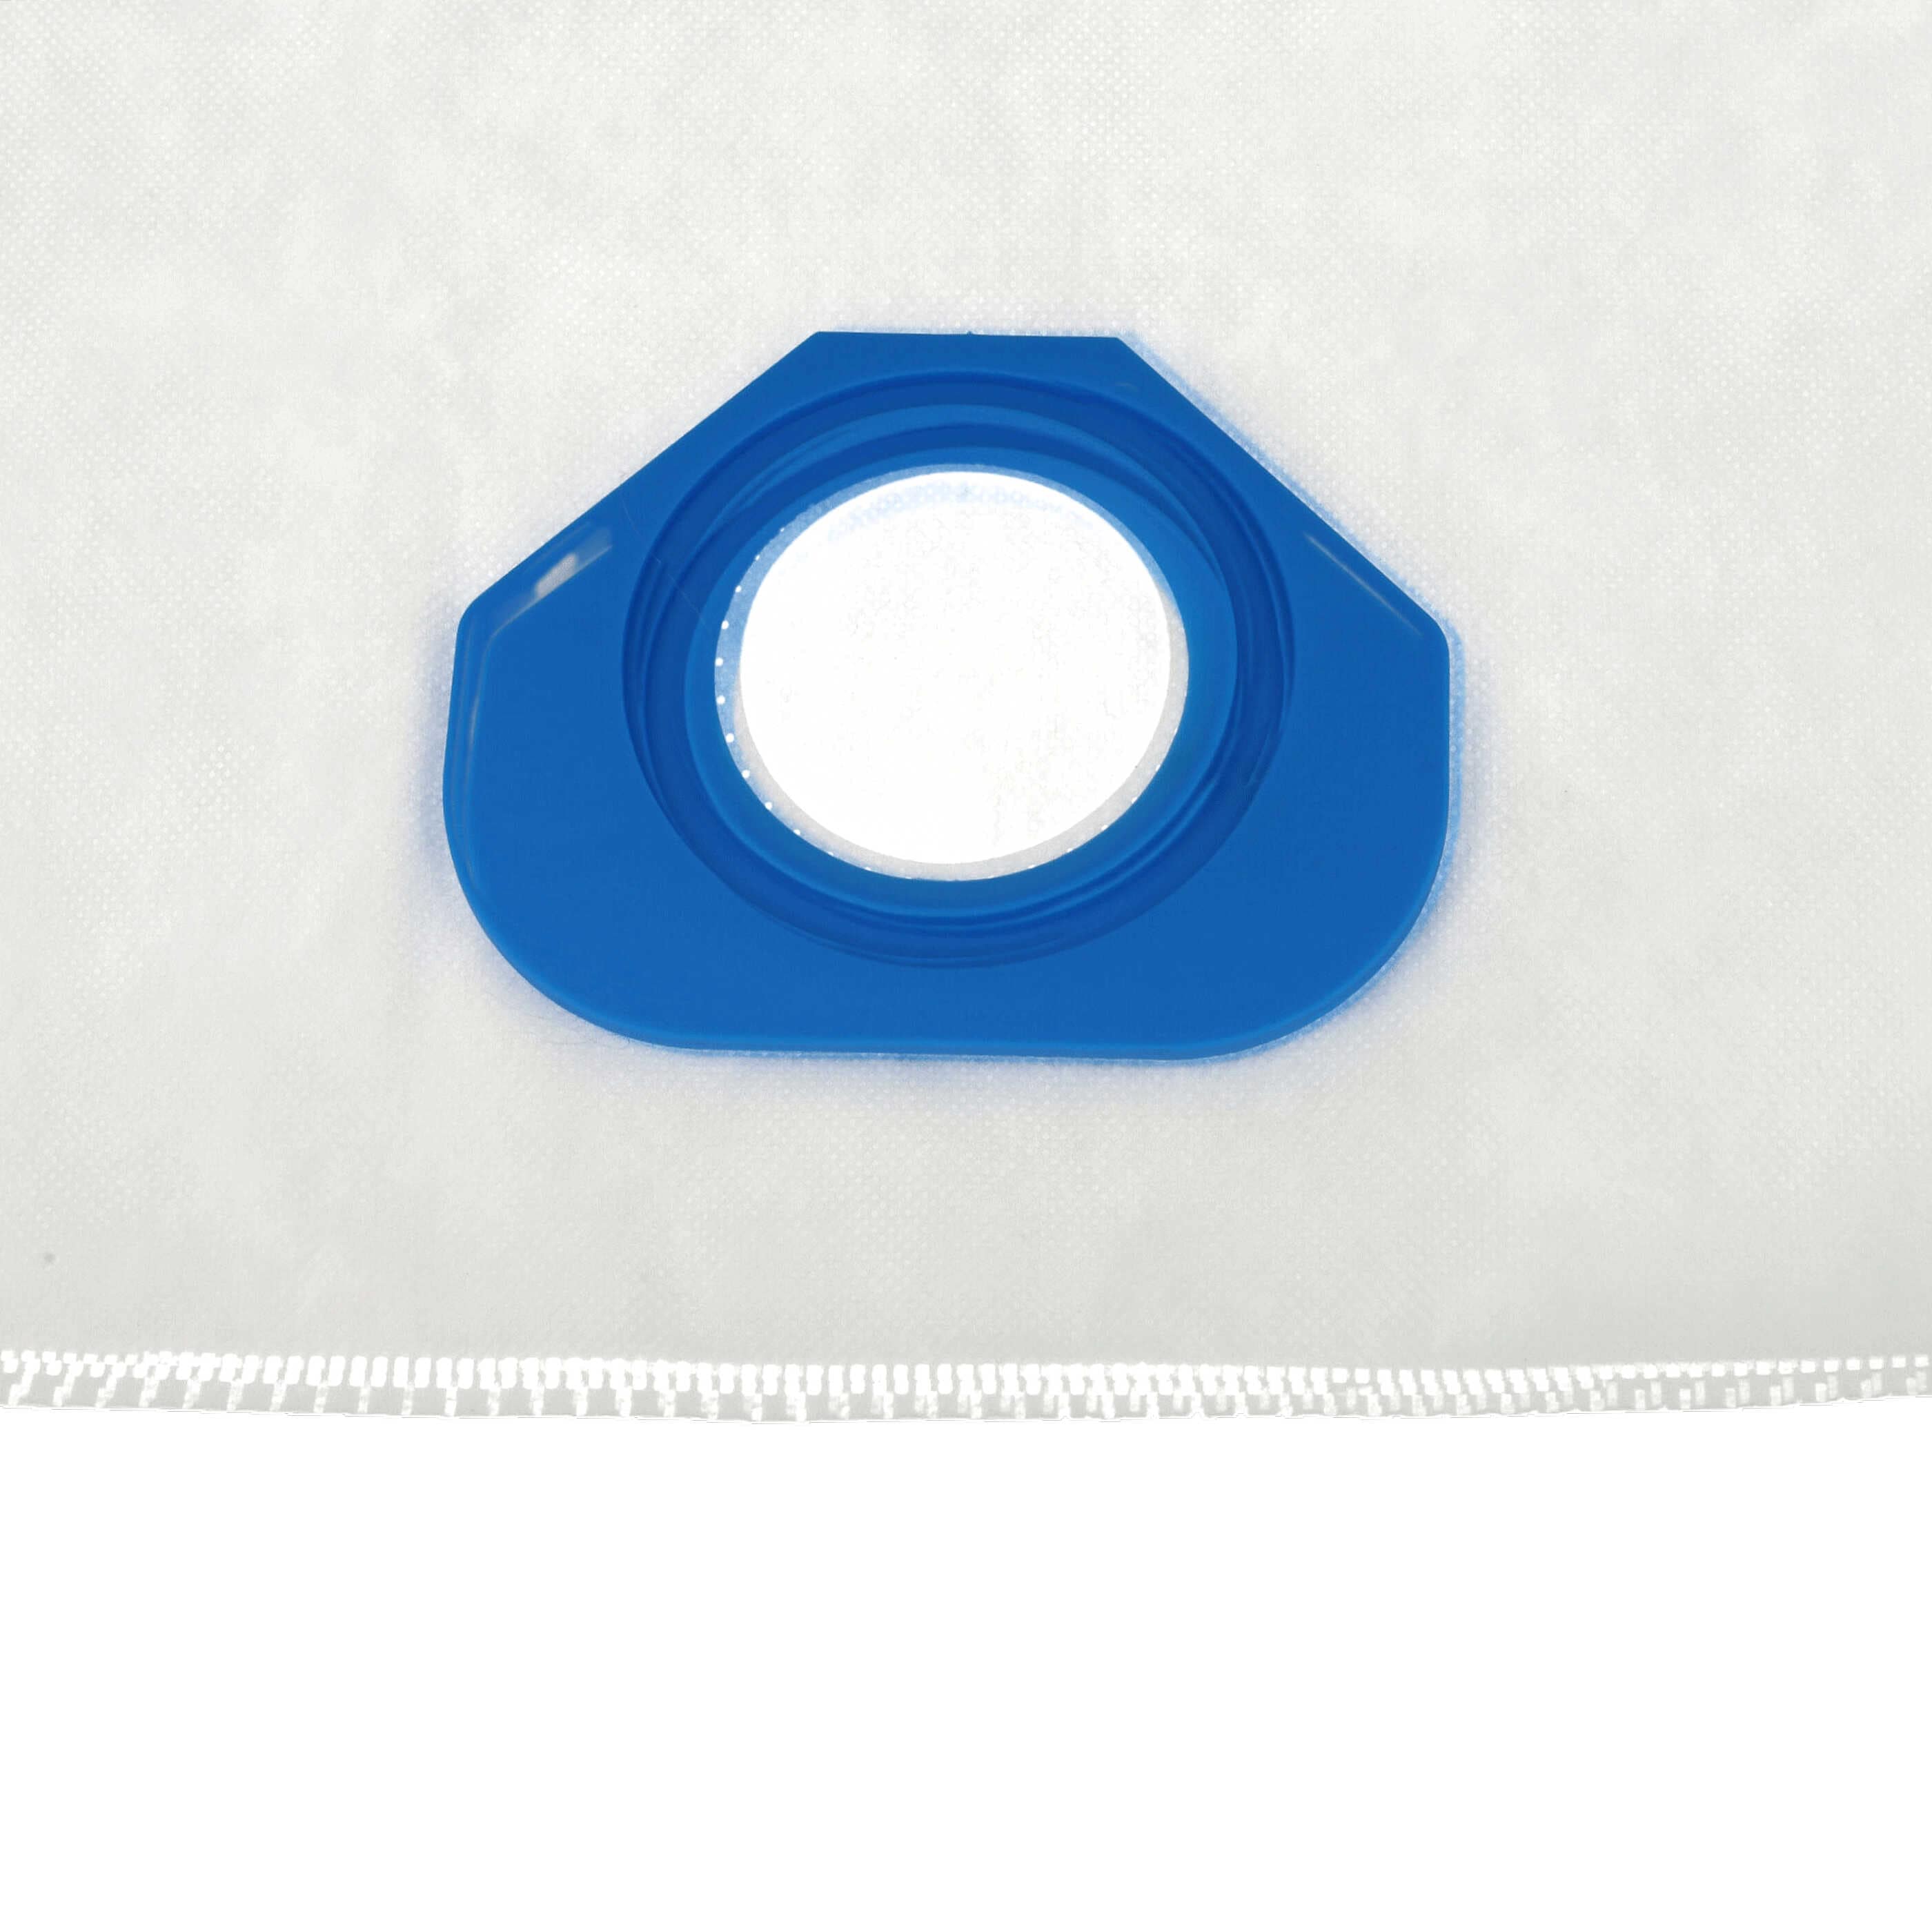 20x Vacuum Cleaner Bag replaces BVC 13060 for BVC - microfleece